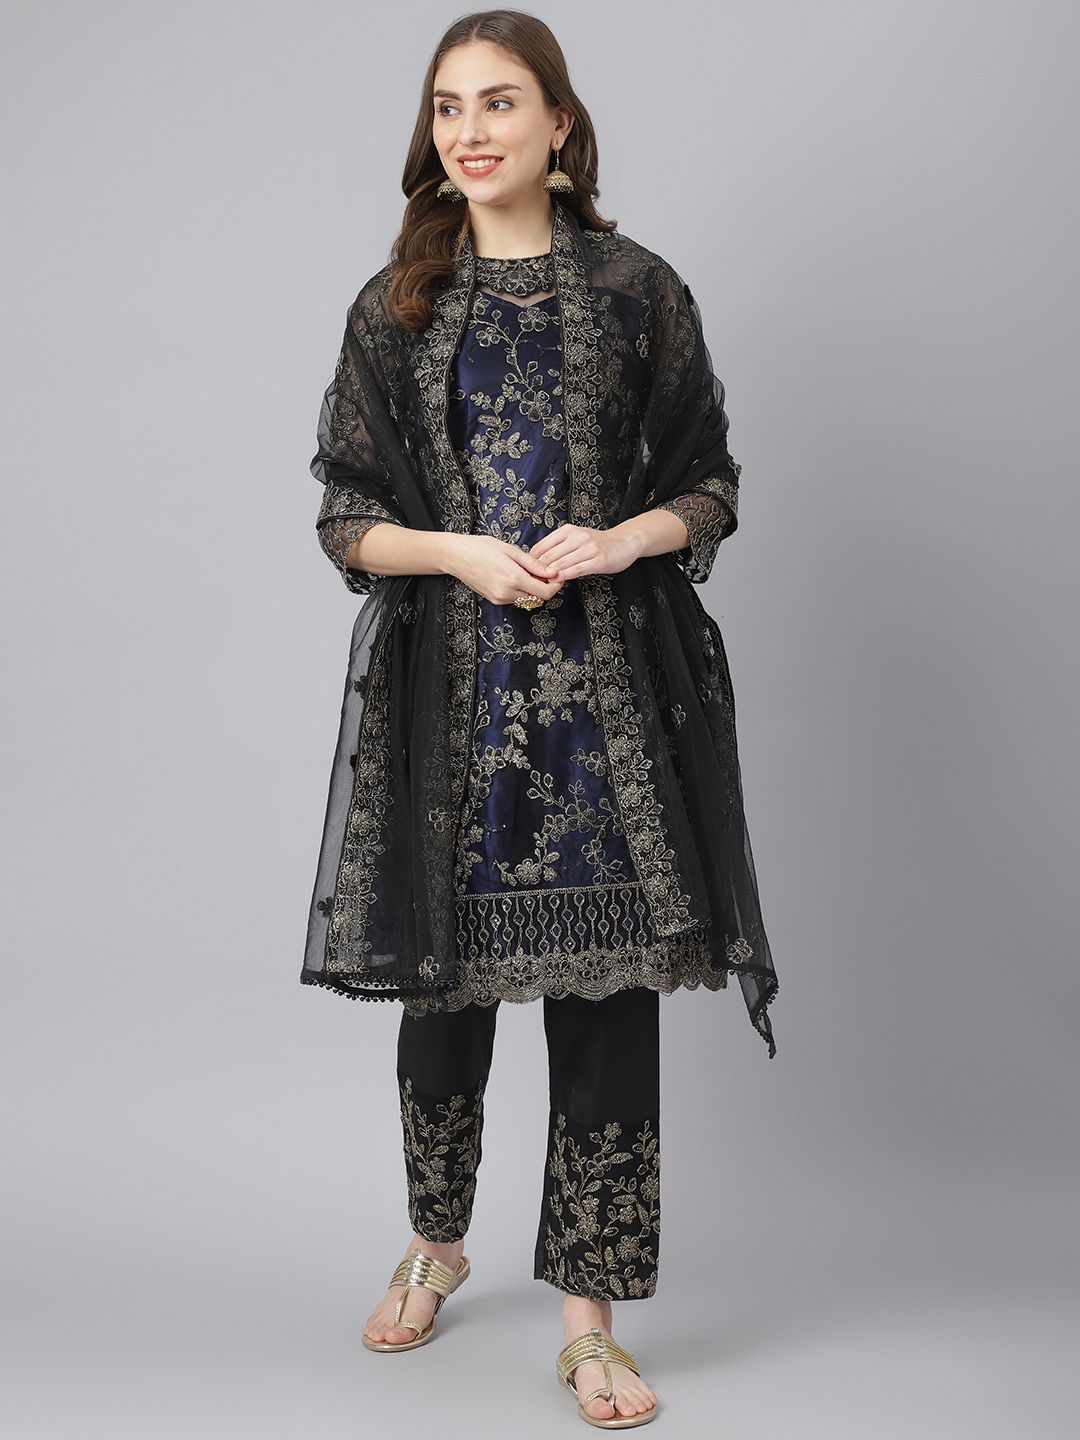 Readiprint Fashions Women Black & Navy Blue Embroidered Semi-Stitched Dress Material Price in India